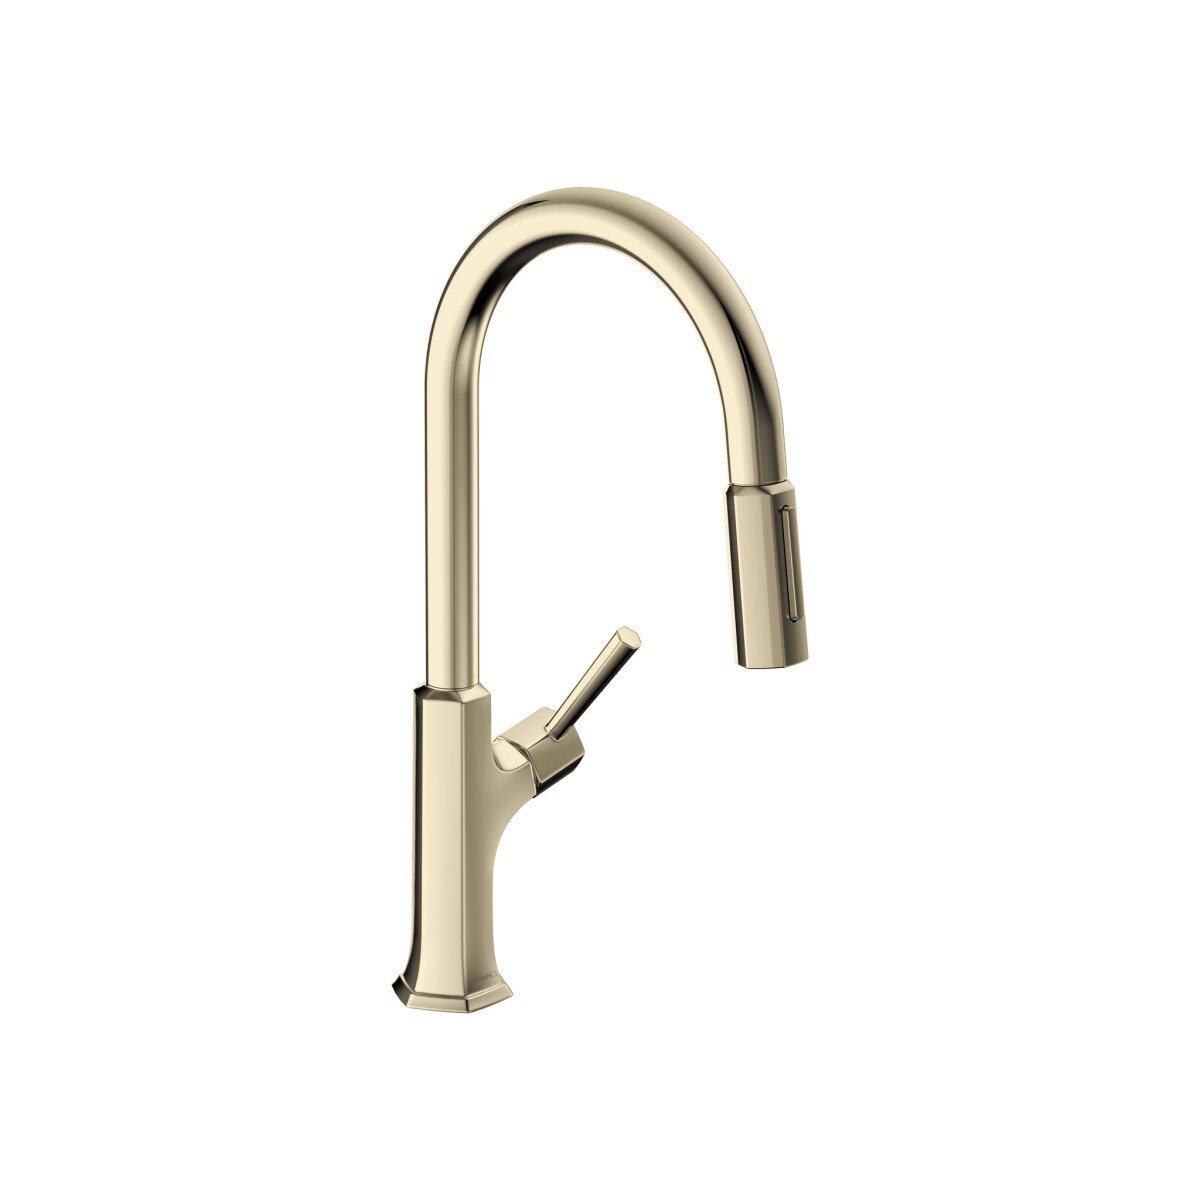 Hansgrohe Polished Nickel Single Handle Pull-down Kitchen Faucet